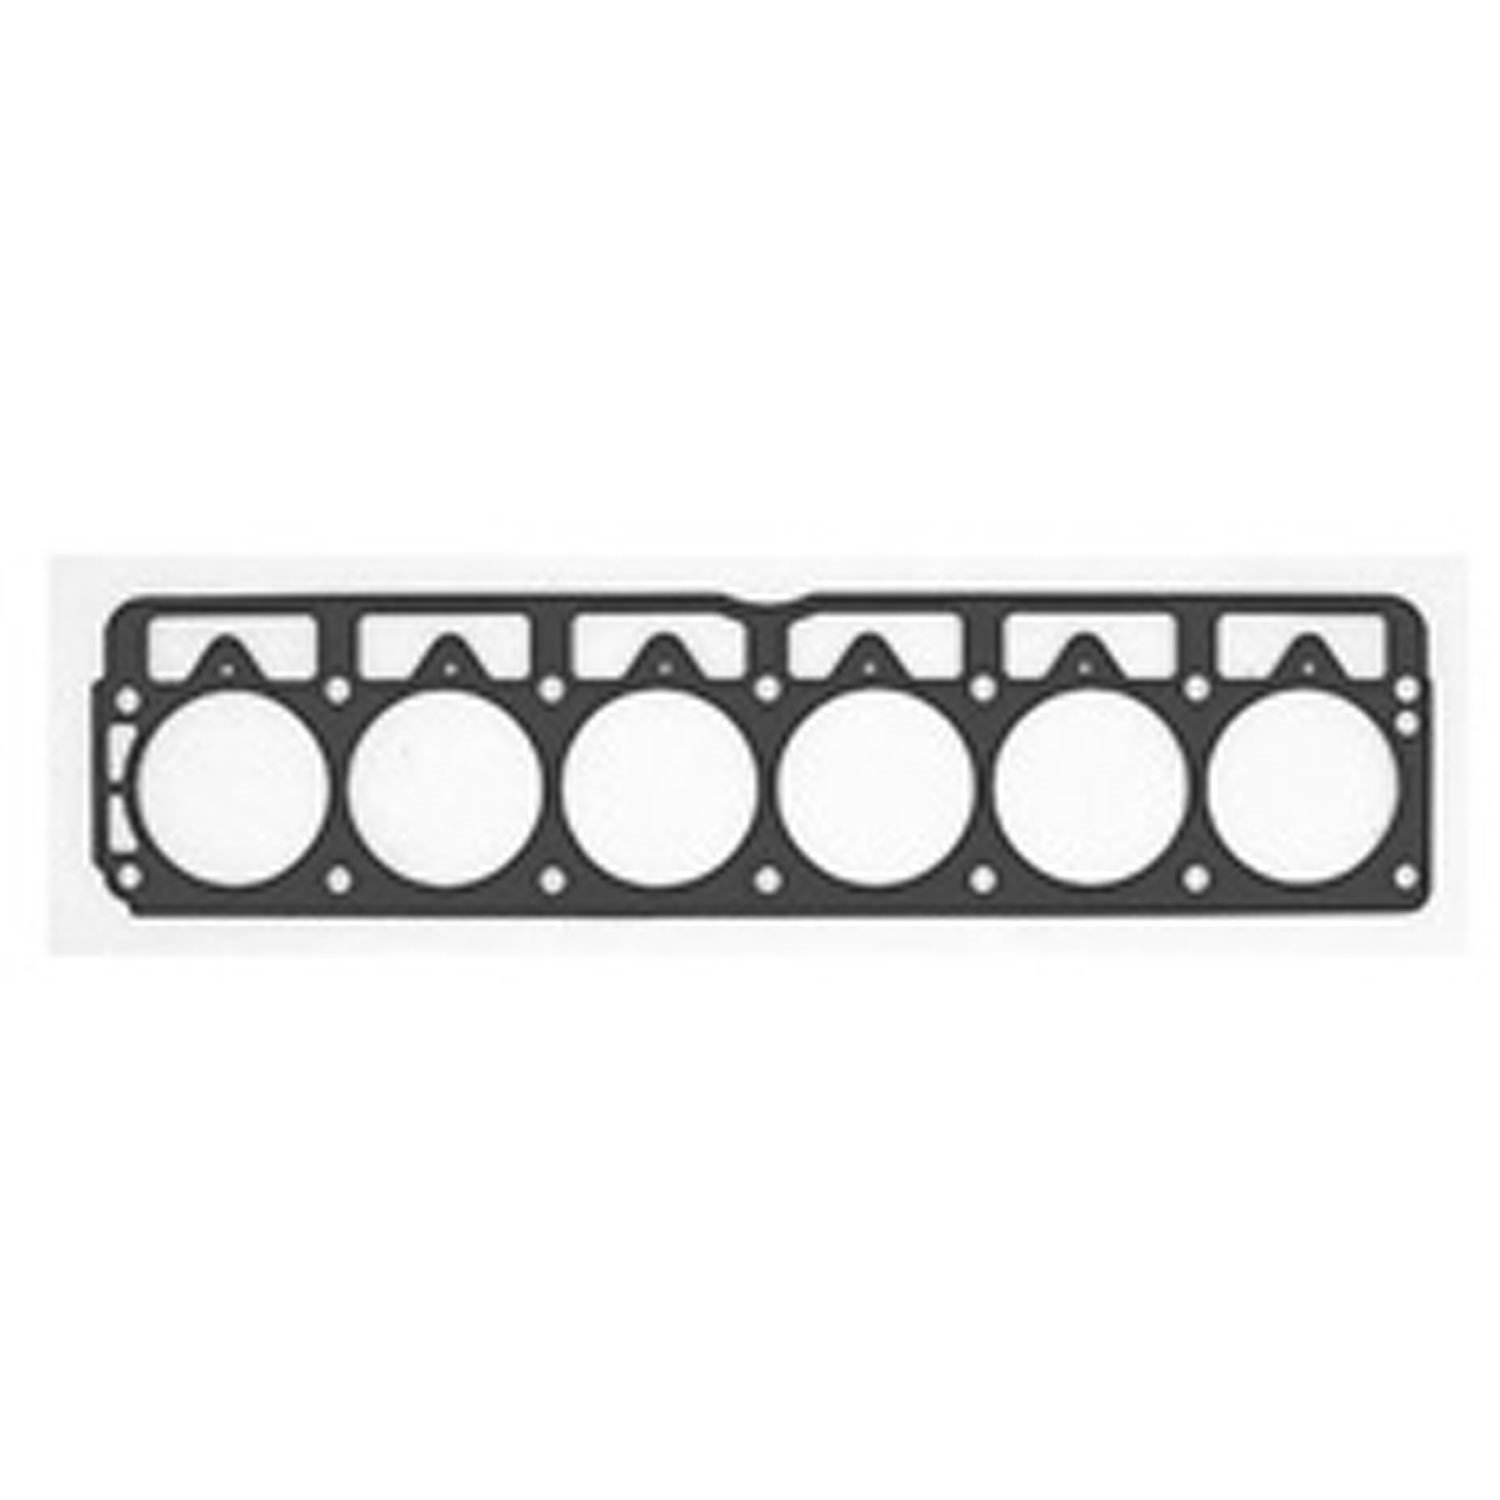 This 4.0L cylinder head gasket from Omix-ADA fits 91-95 Cherokees and Wranglers 91-92 Comanches and 93-95 Grand Cherokees.